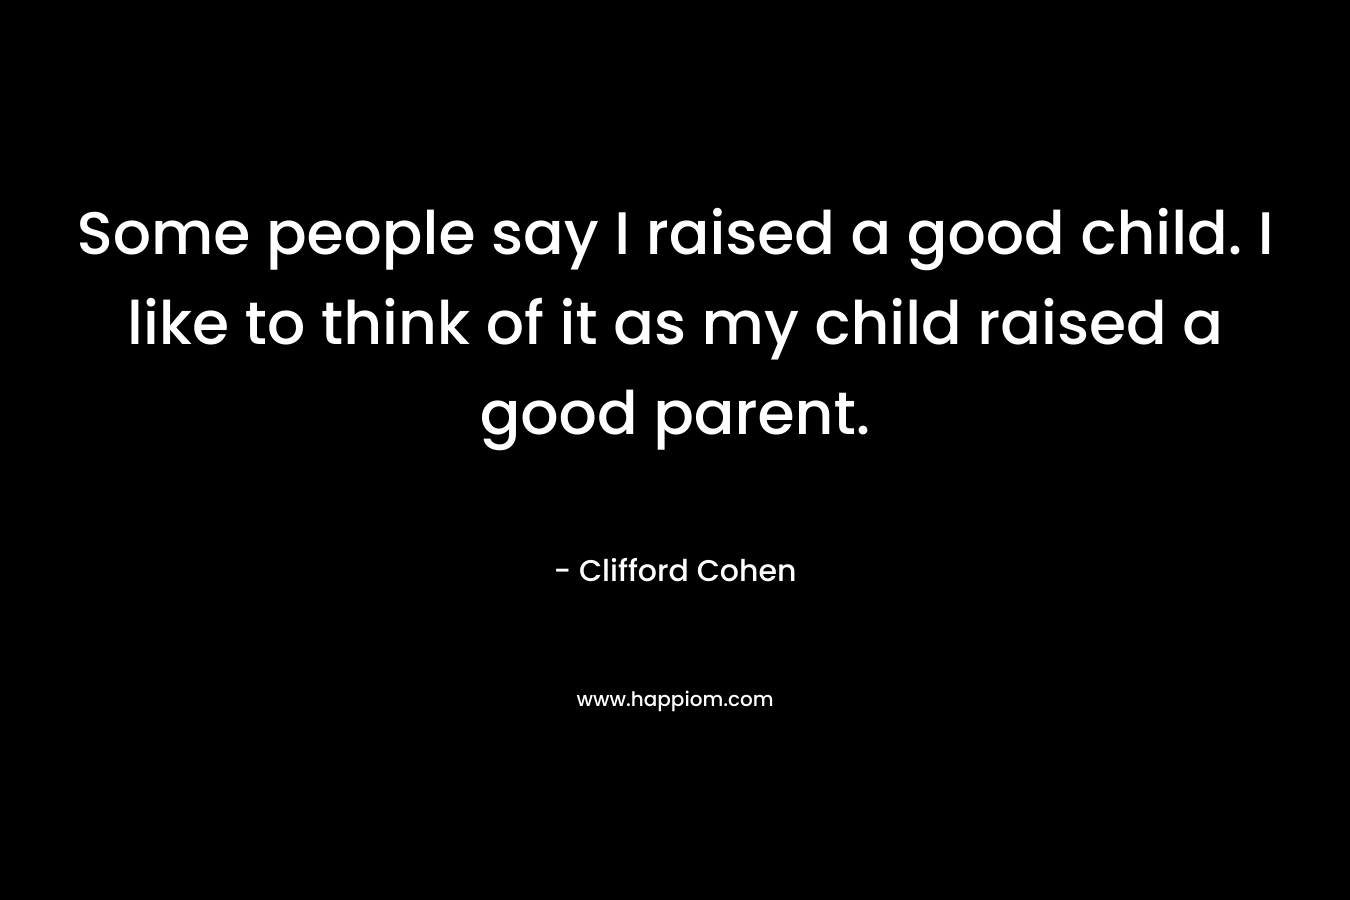 Some people say I raised a good child. I like to think of it as my child raised a good parent. – Clifford Cohen